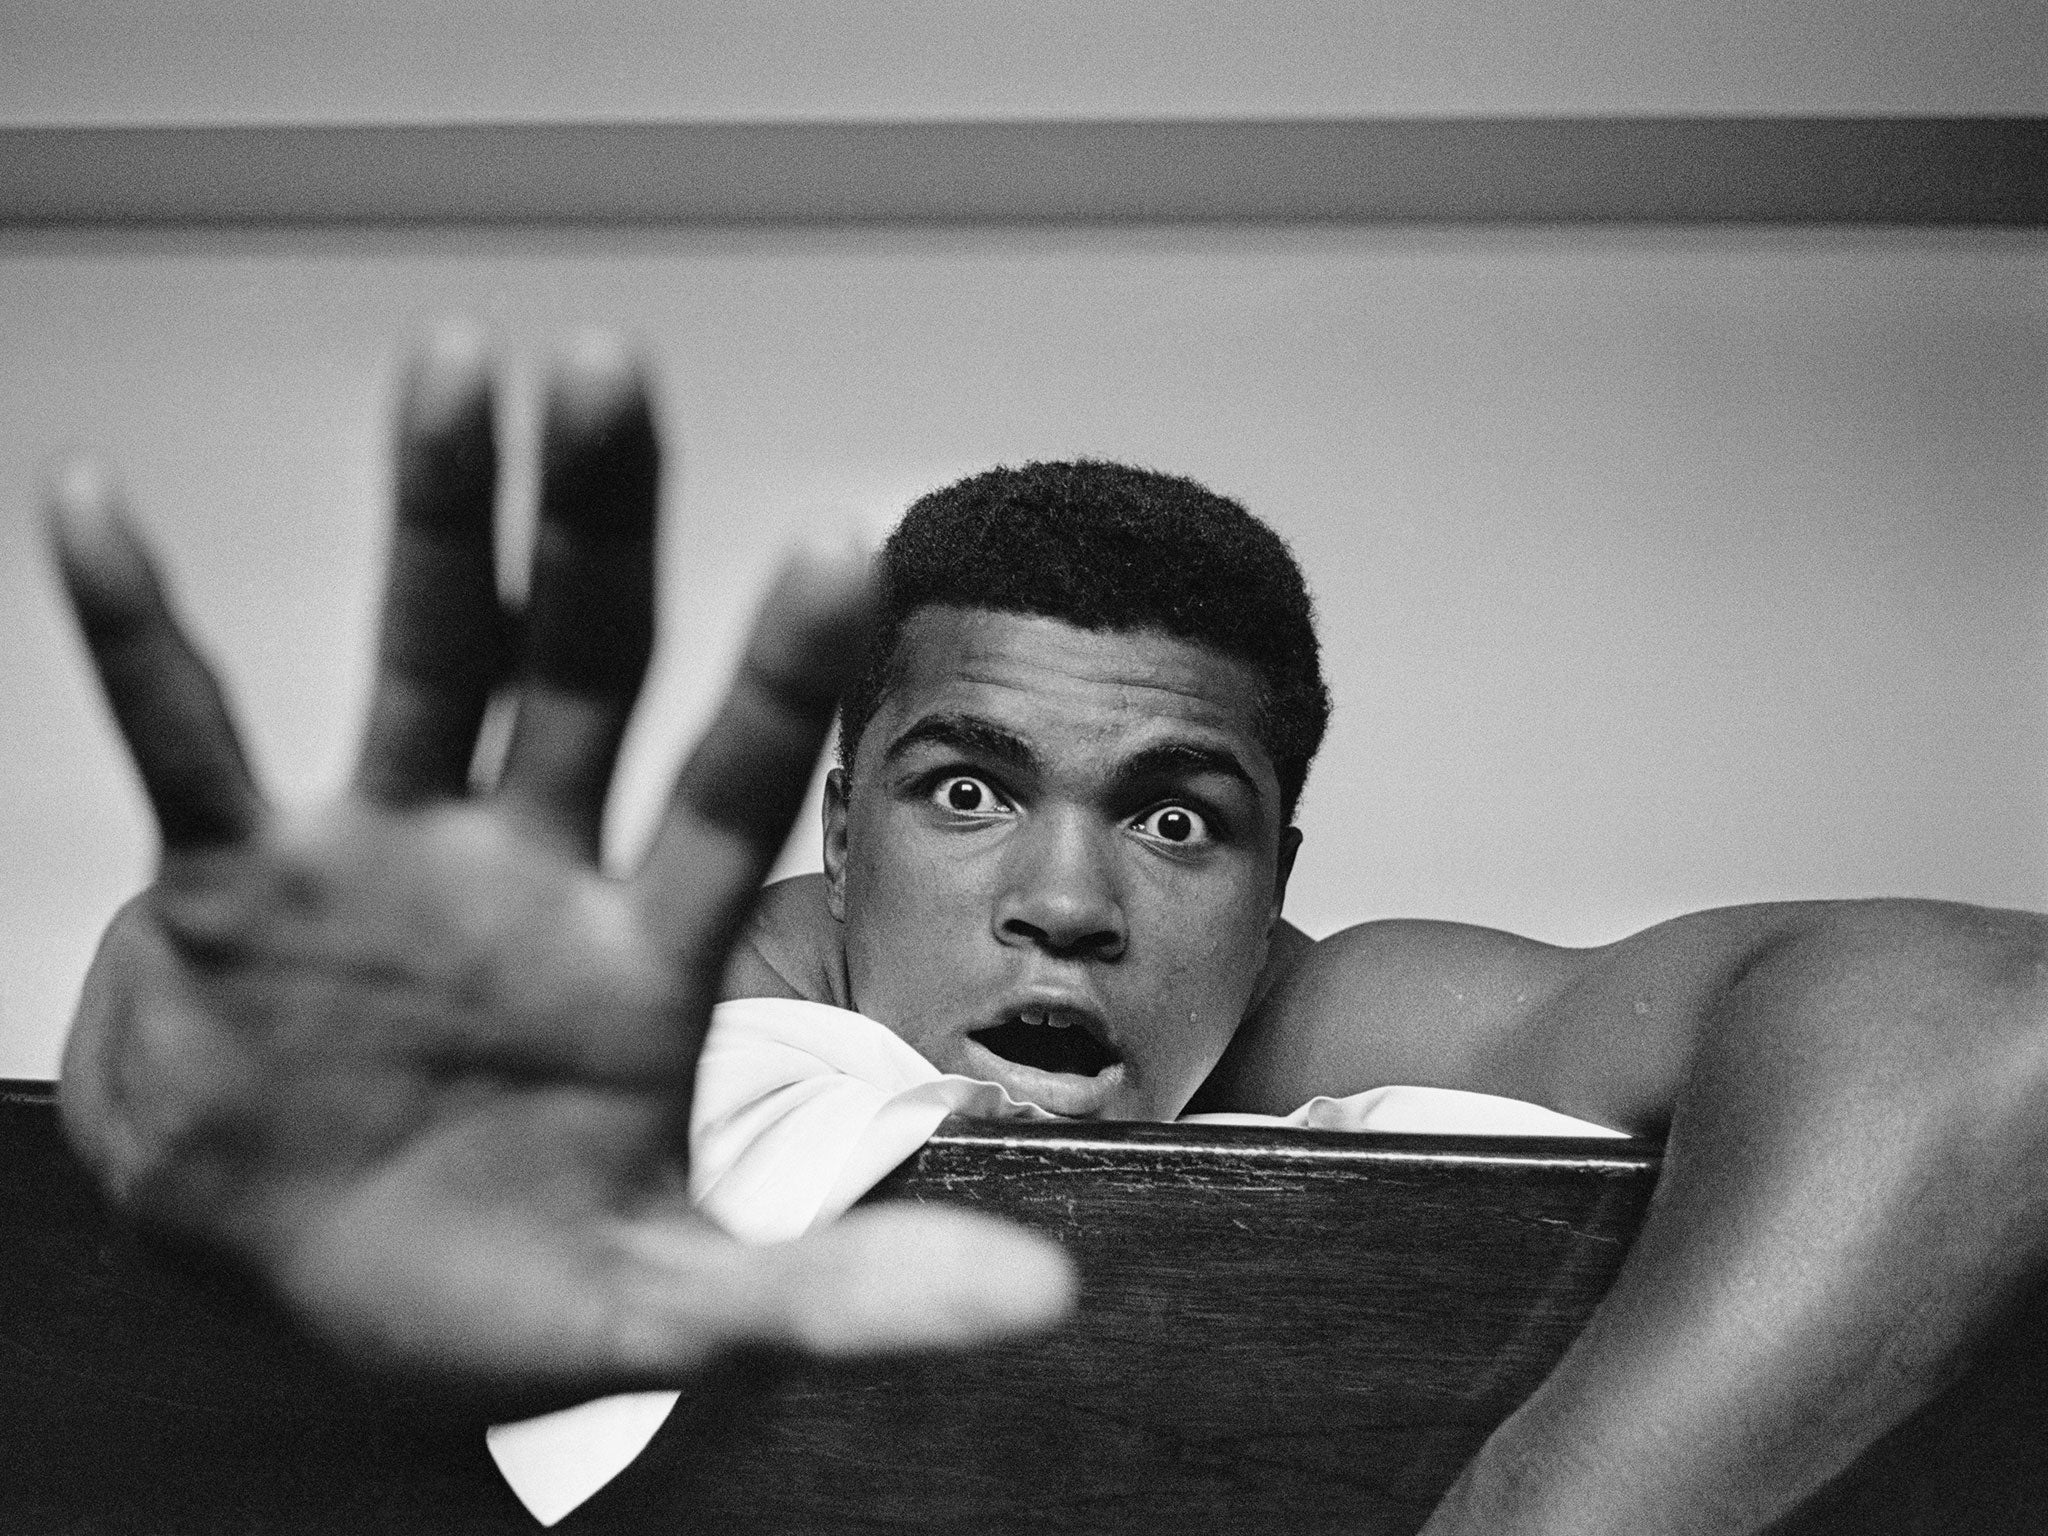 Muhammad Ali death: The boxer's response when asked what he wanted to do when he retired